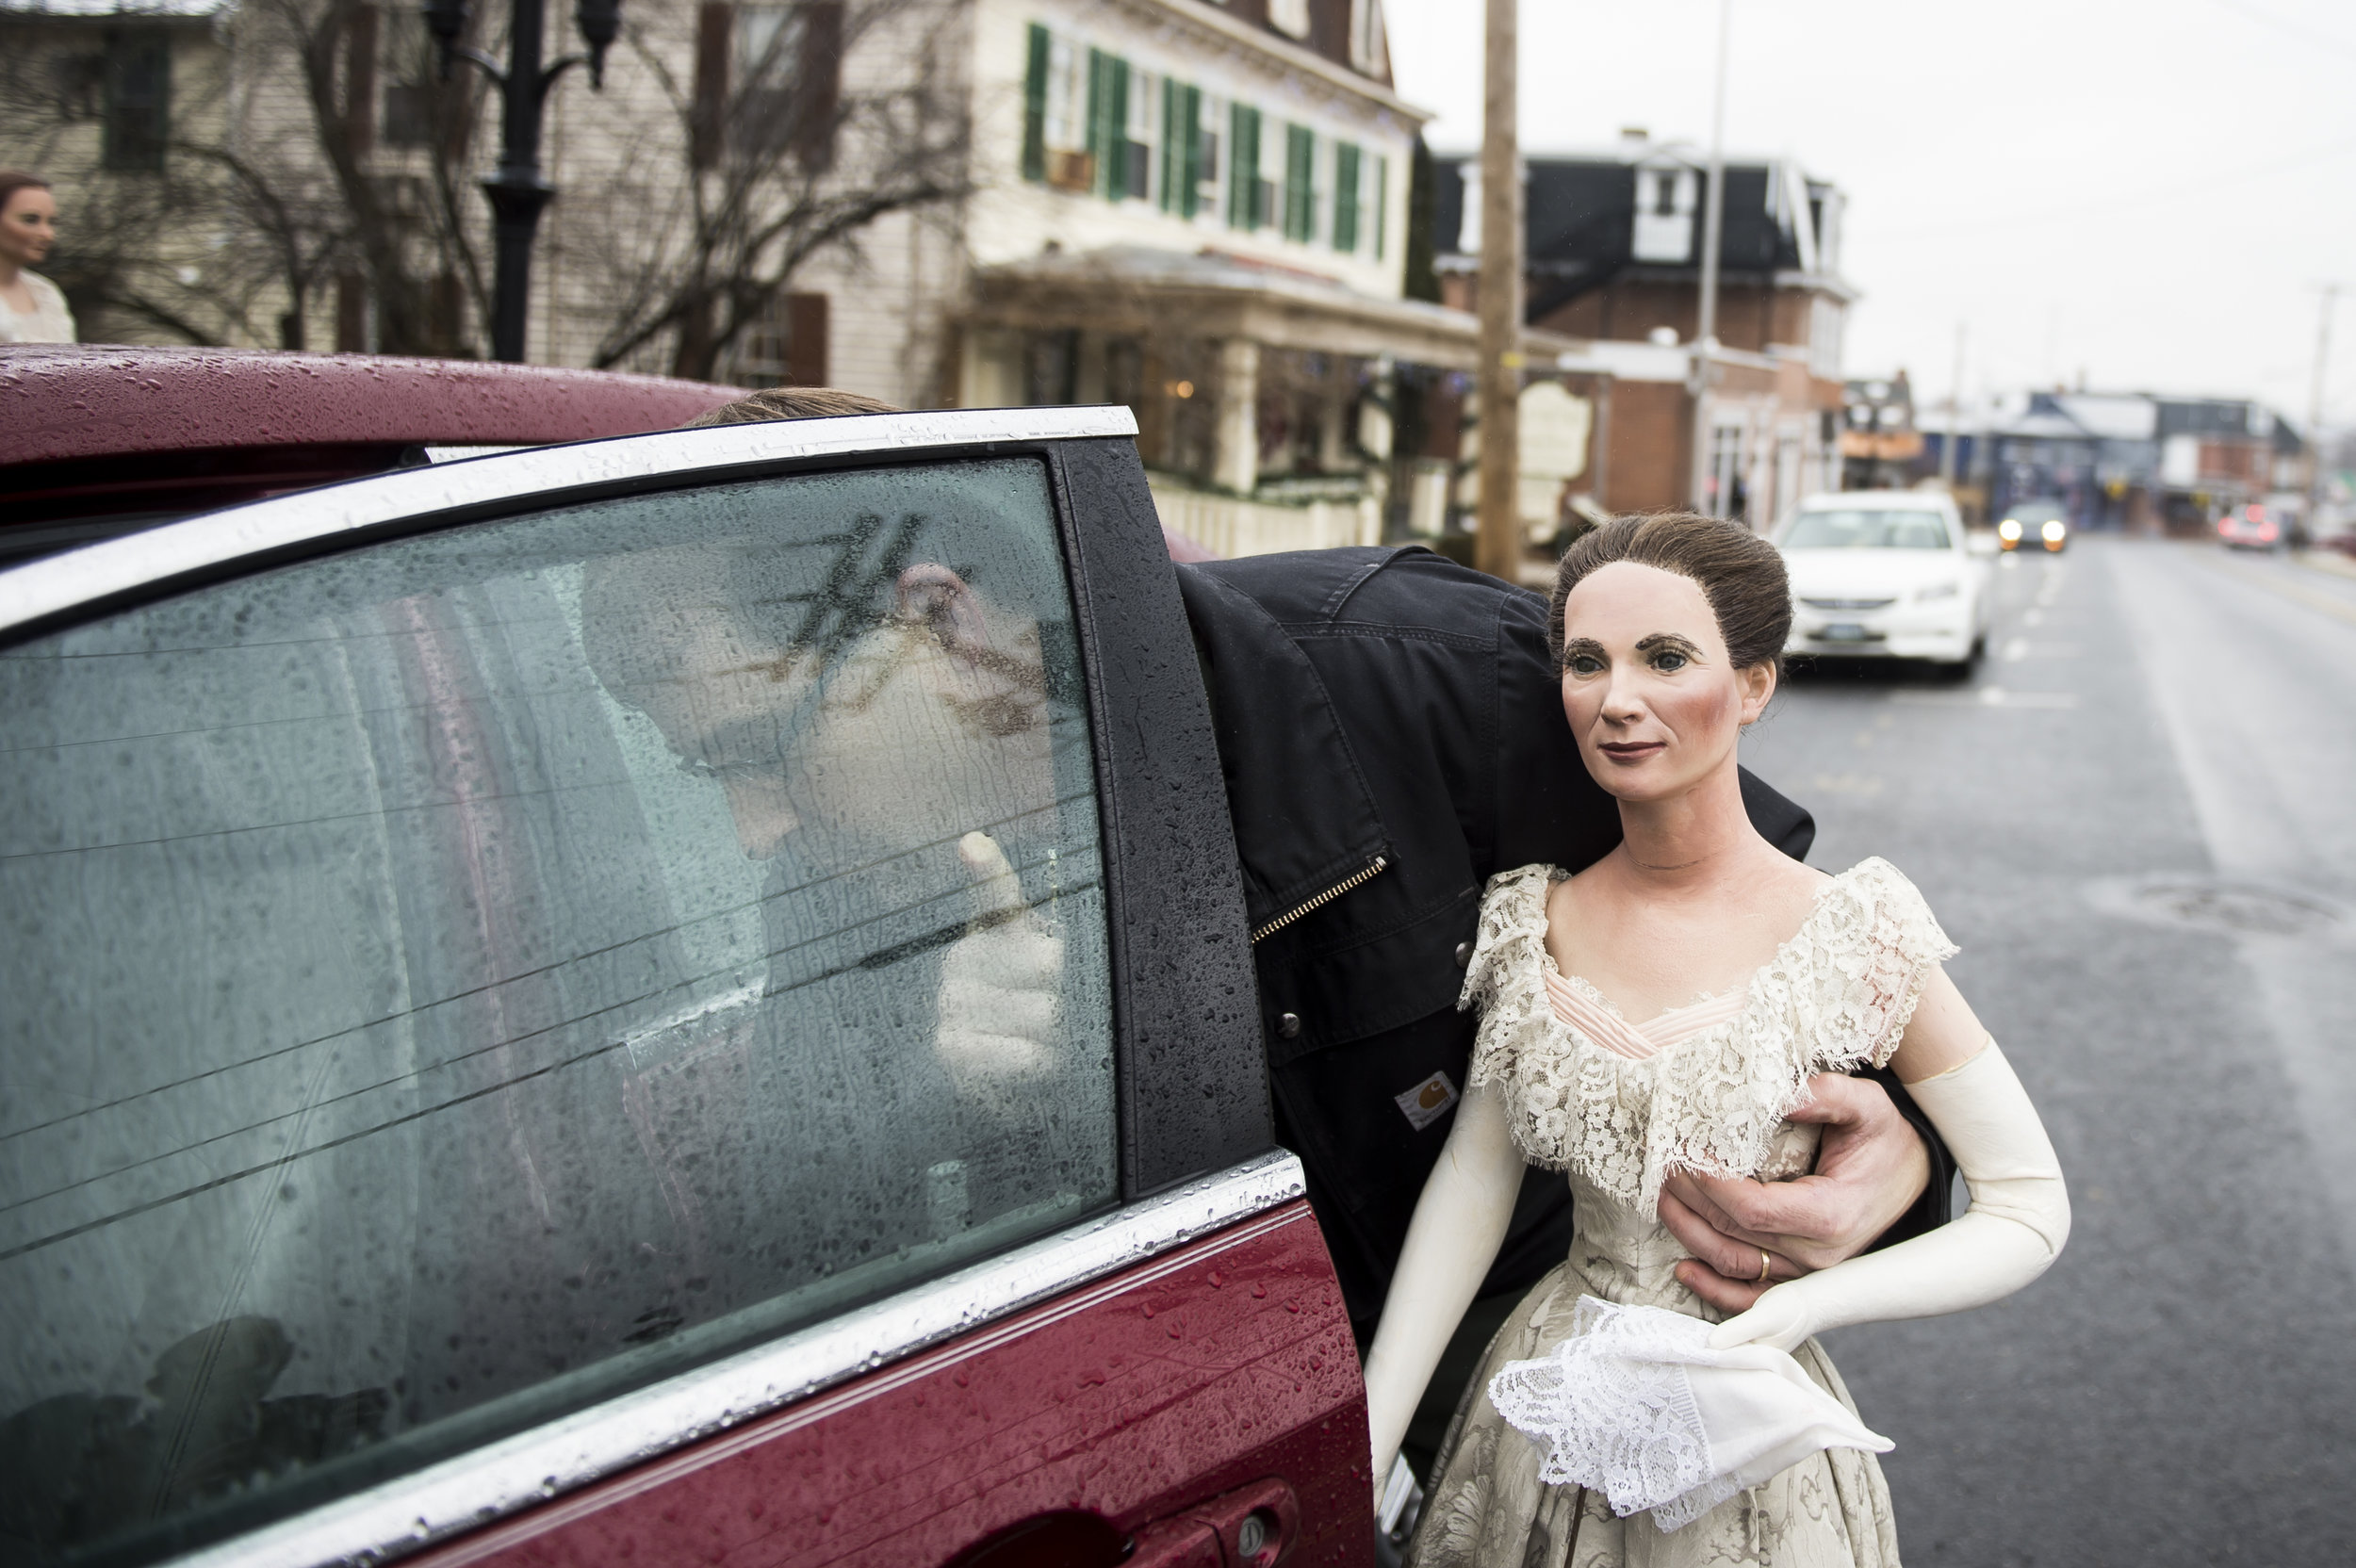  John Buchheister packs a wax sculpture of First Lady Julia Dent Grant into his car after an auction at the Hall of Presidents and First Ladies Museum in Gettysburg.&nbsp; 